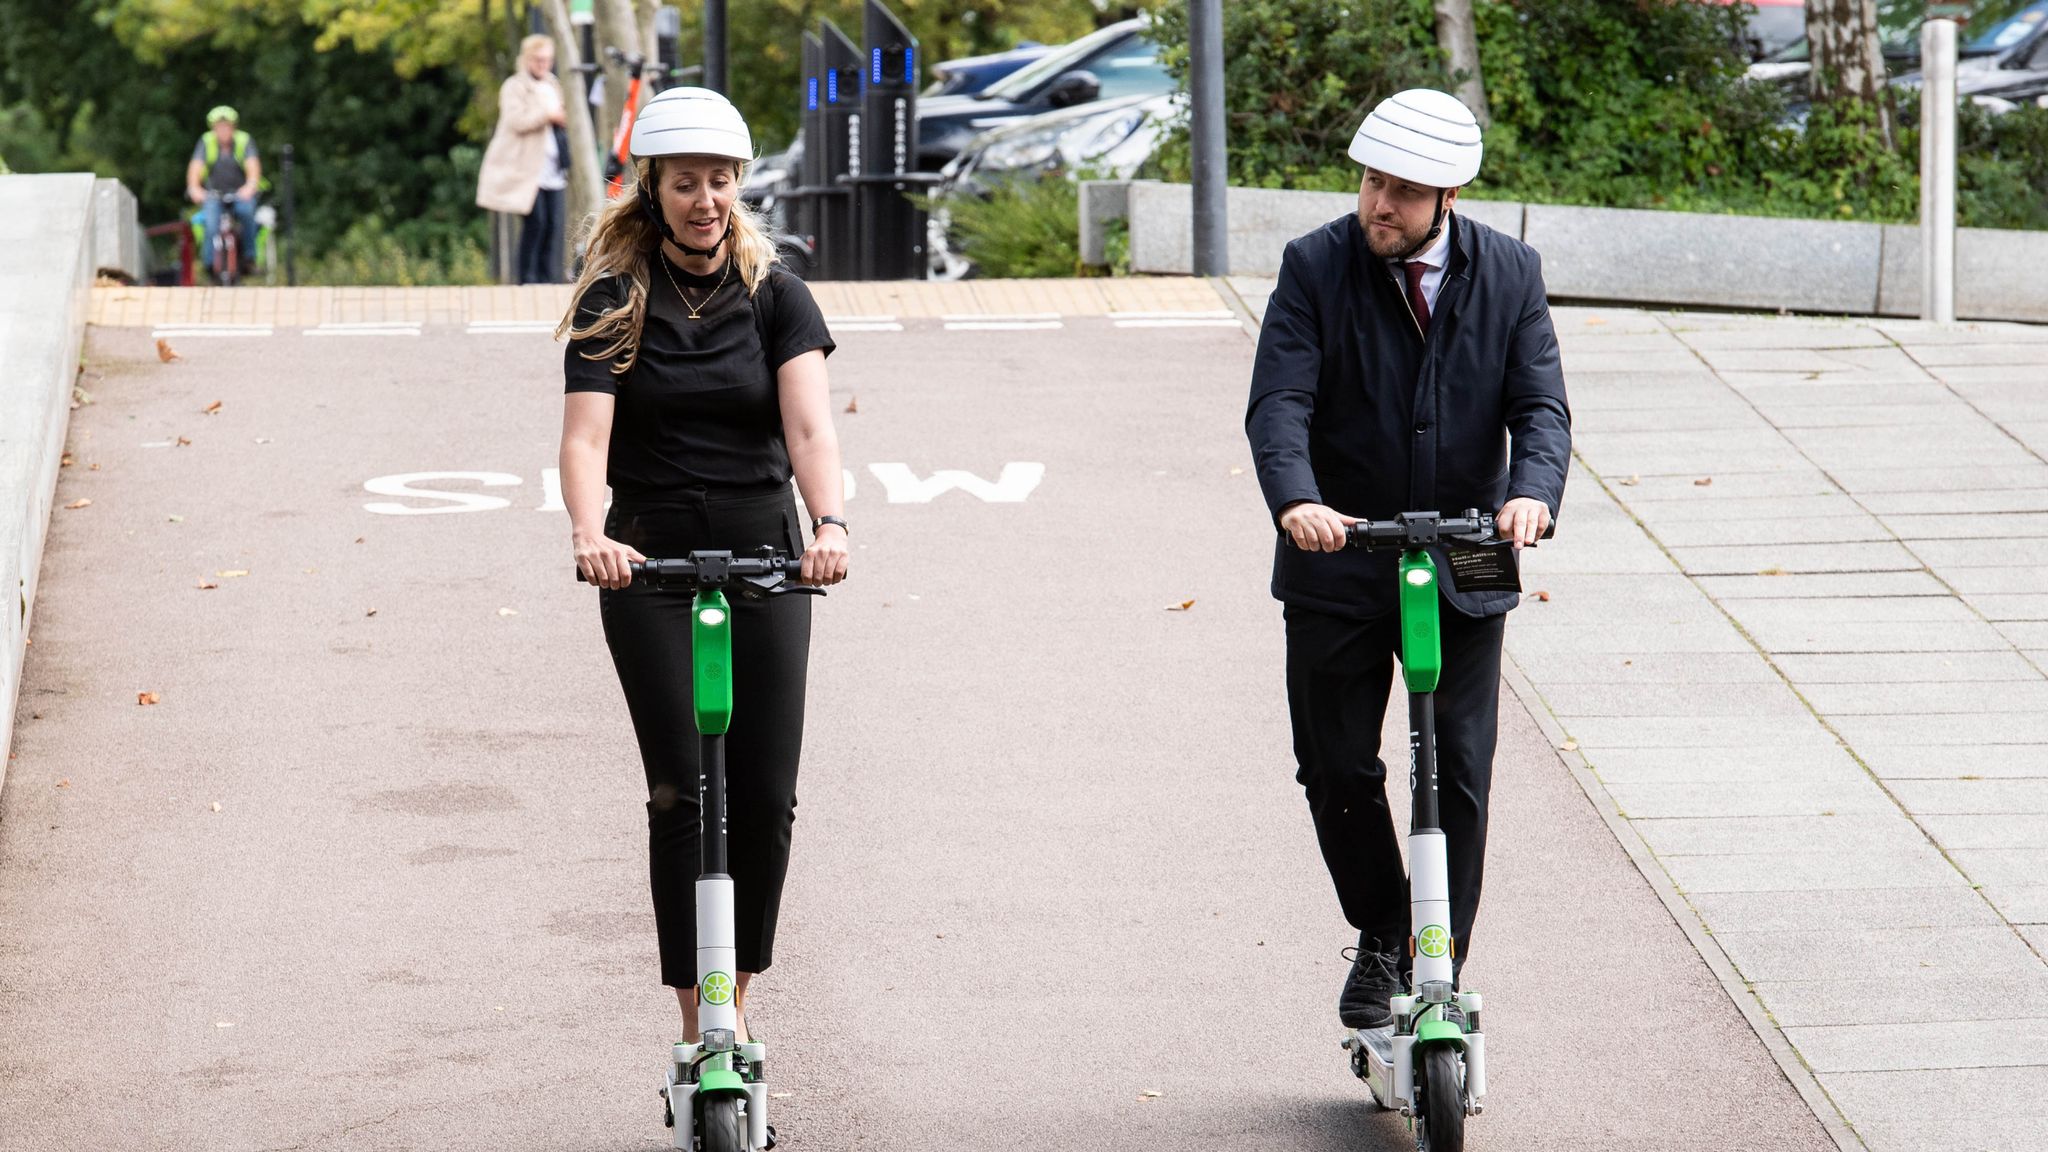 London Fire Brigade on X: E-bikes and e-scooters are London's